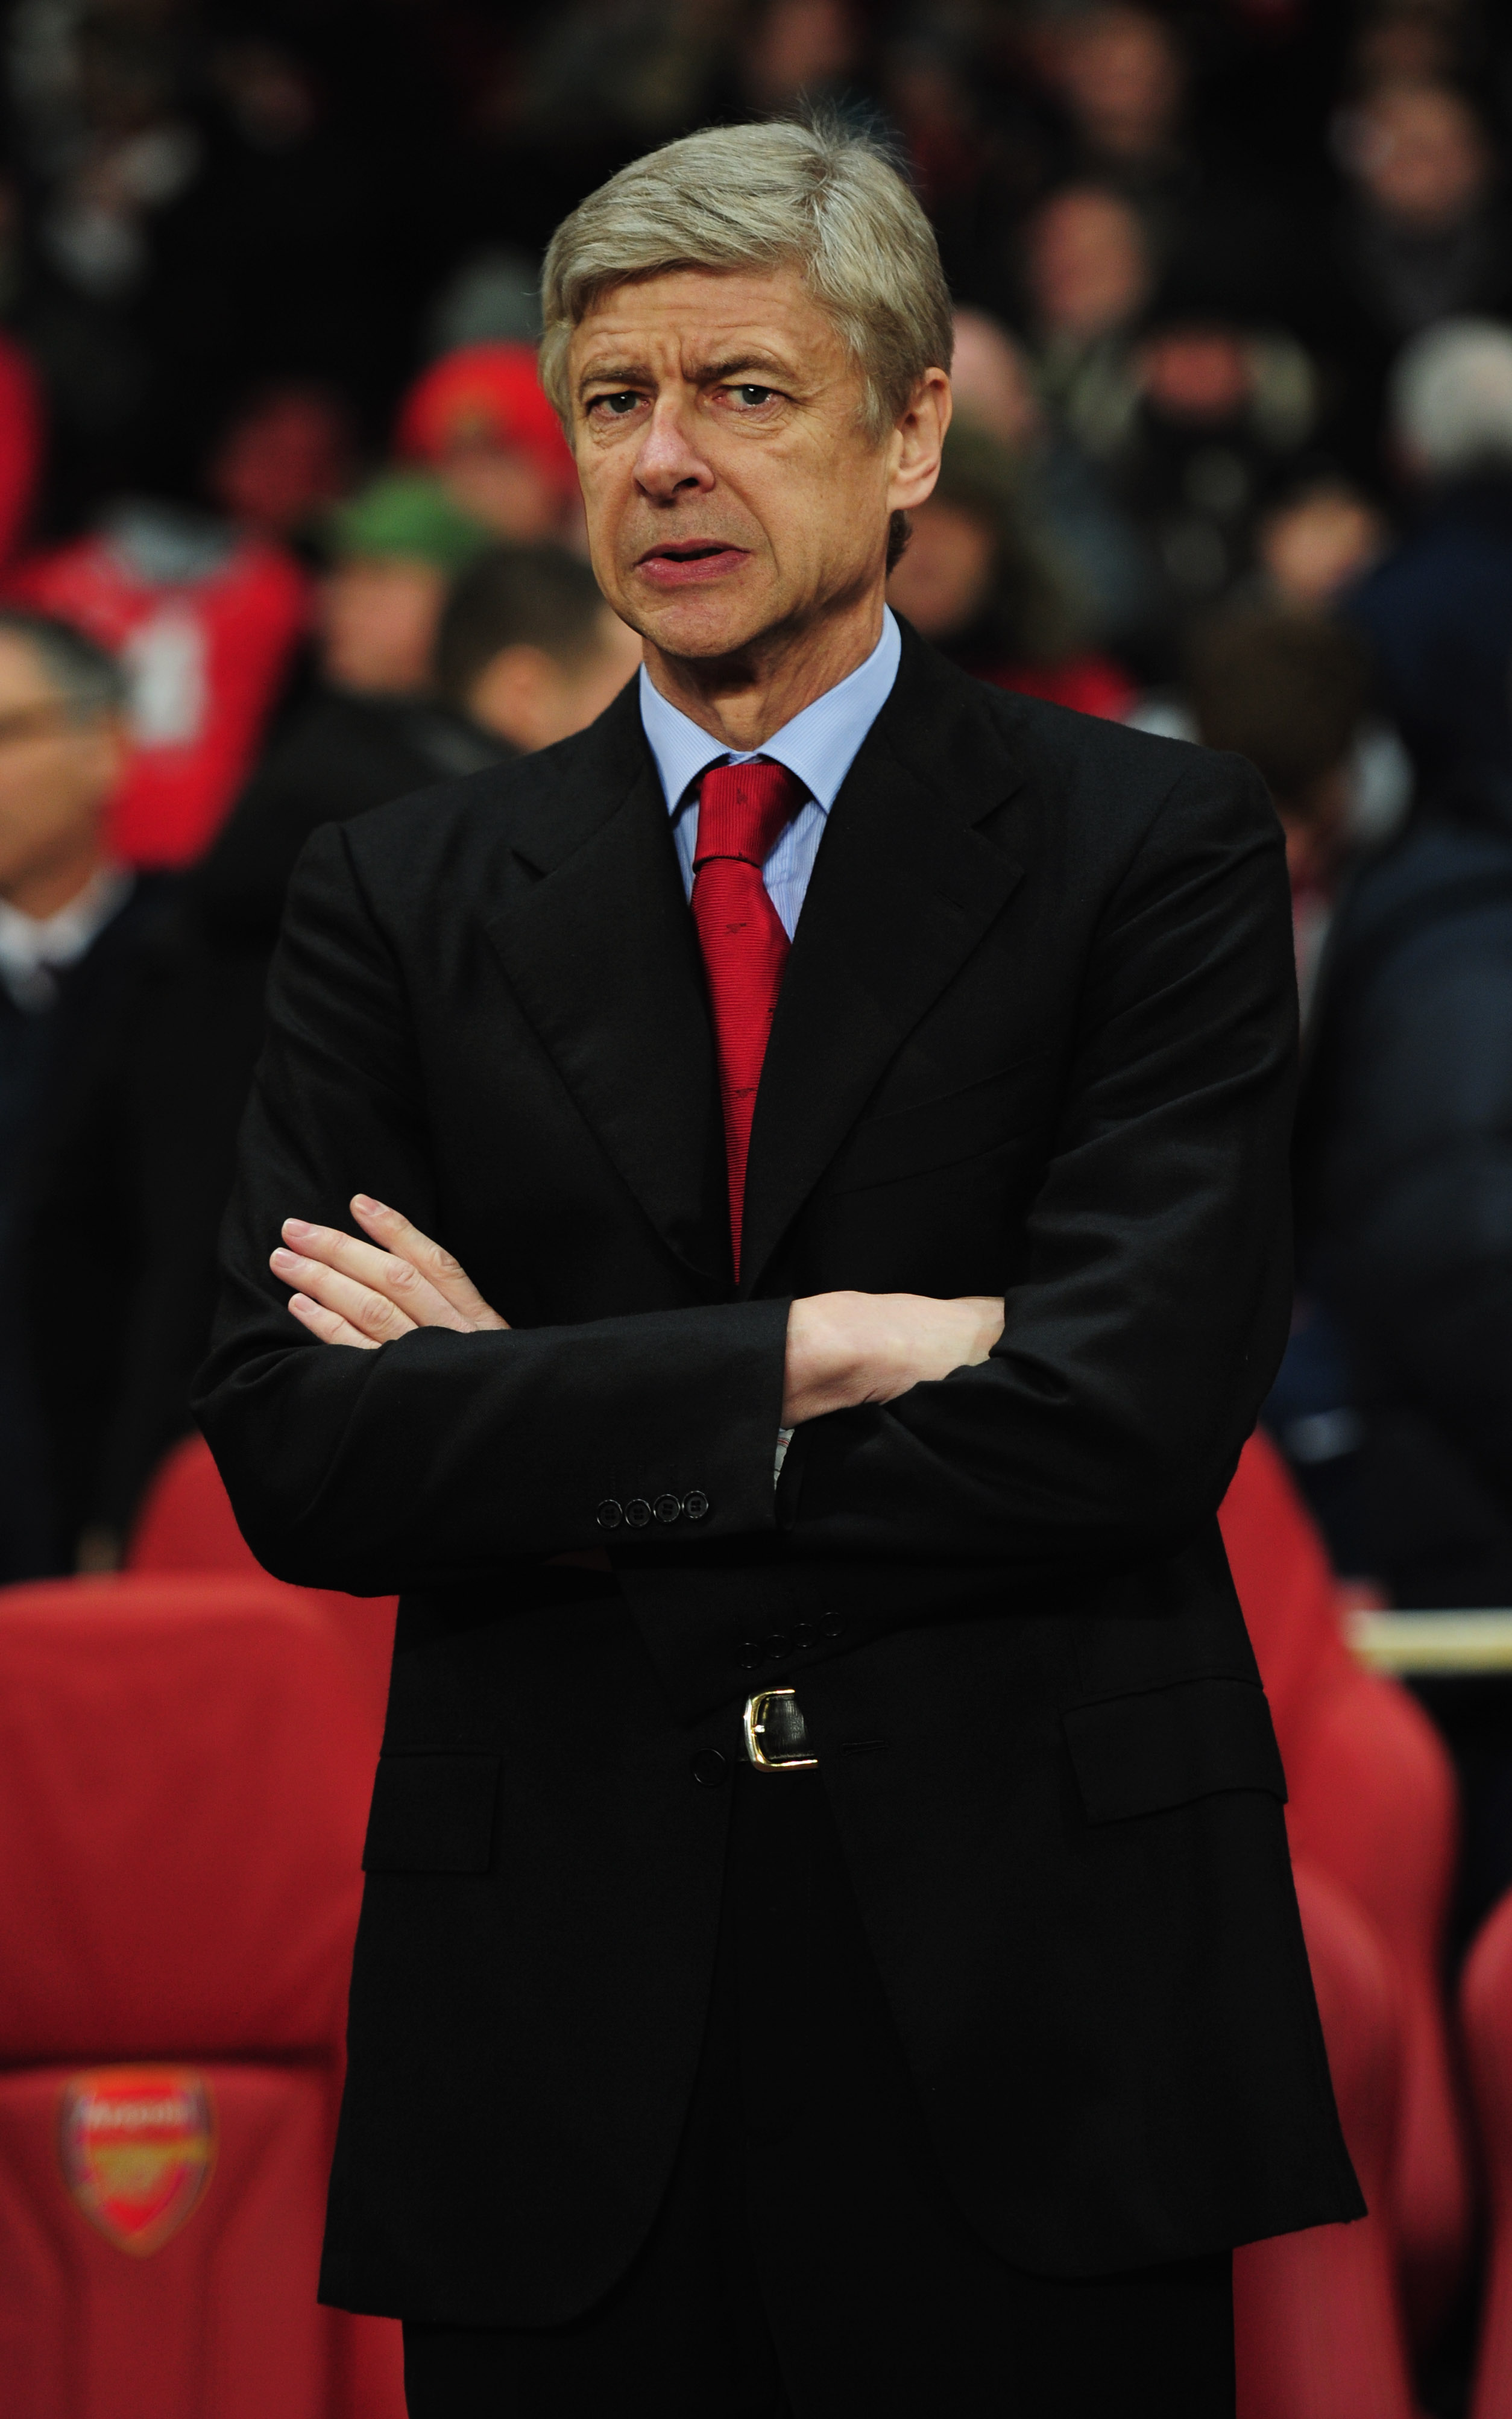 LONDON, ENGLAND - DECEMBER 08:  Arsene Wenger manager of Arsenal looks on prior to the UEFA Champions League Group H match between Arsenal and FK Partizan Belgrade at the Emirates Stadium on December 8, 2010 in London, England.  (Photo by Shaun Botterill/